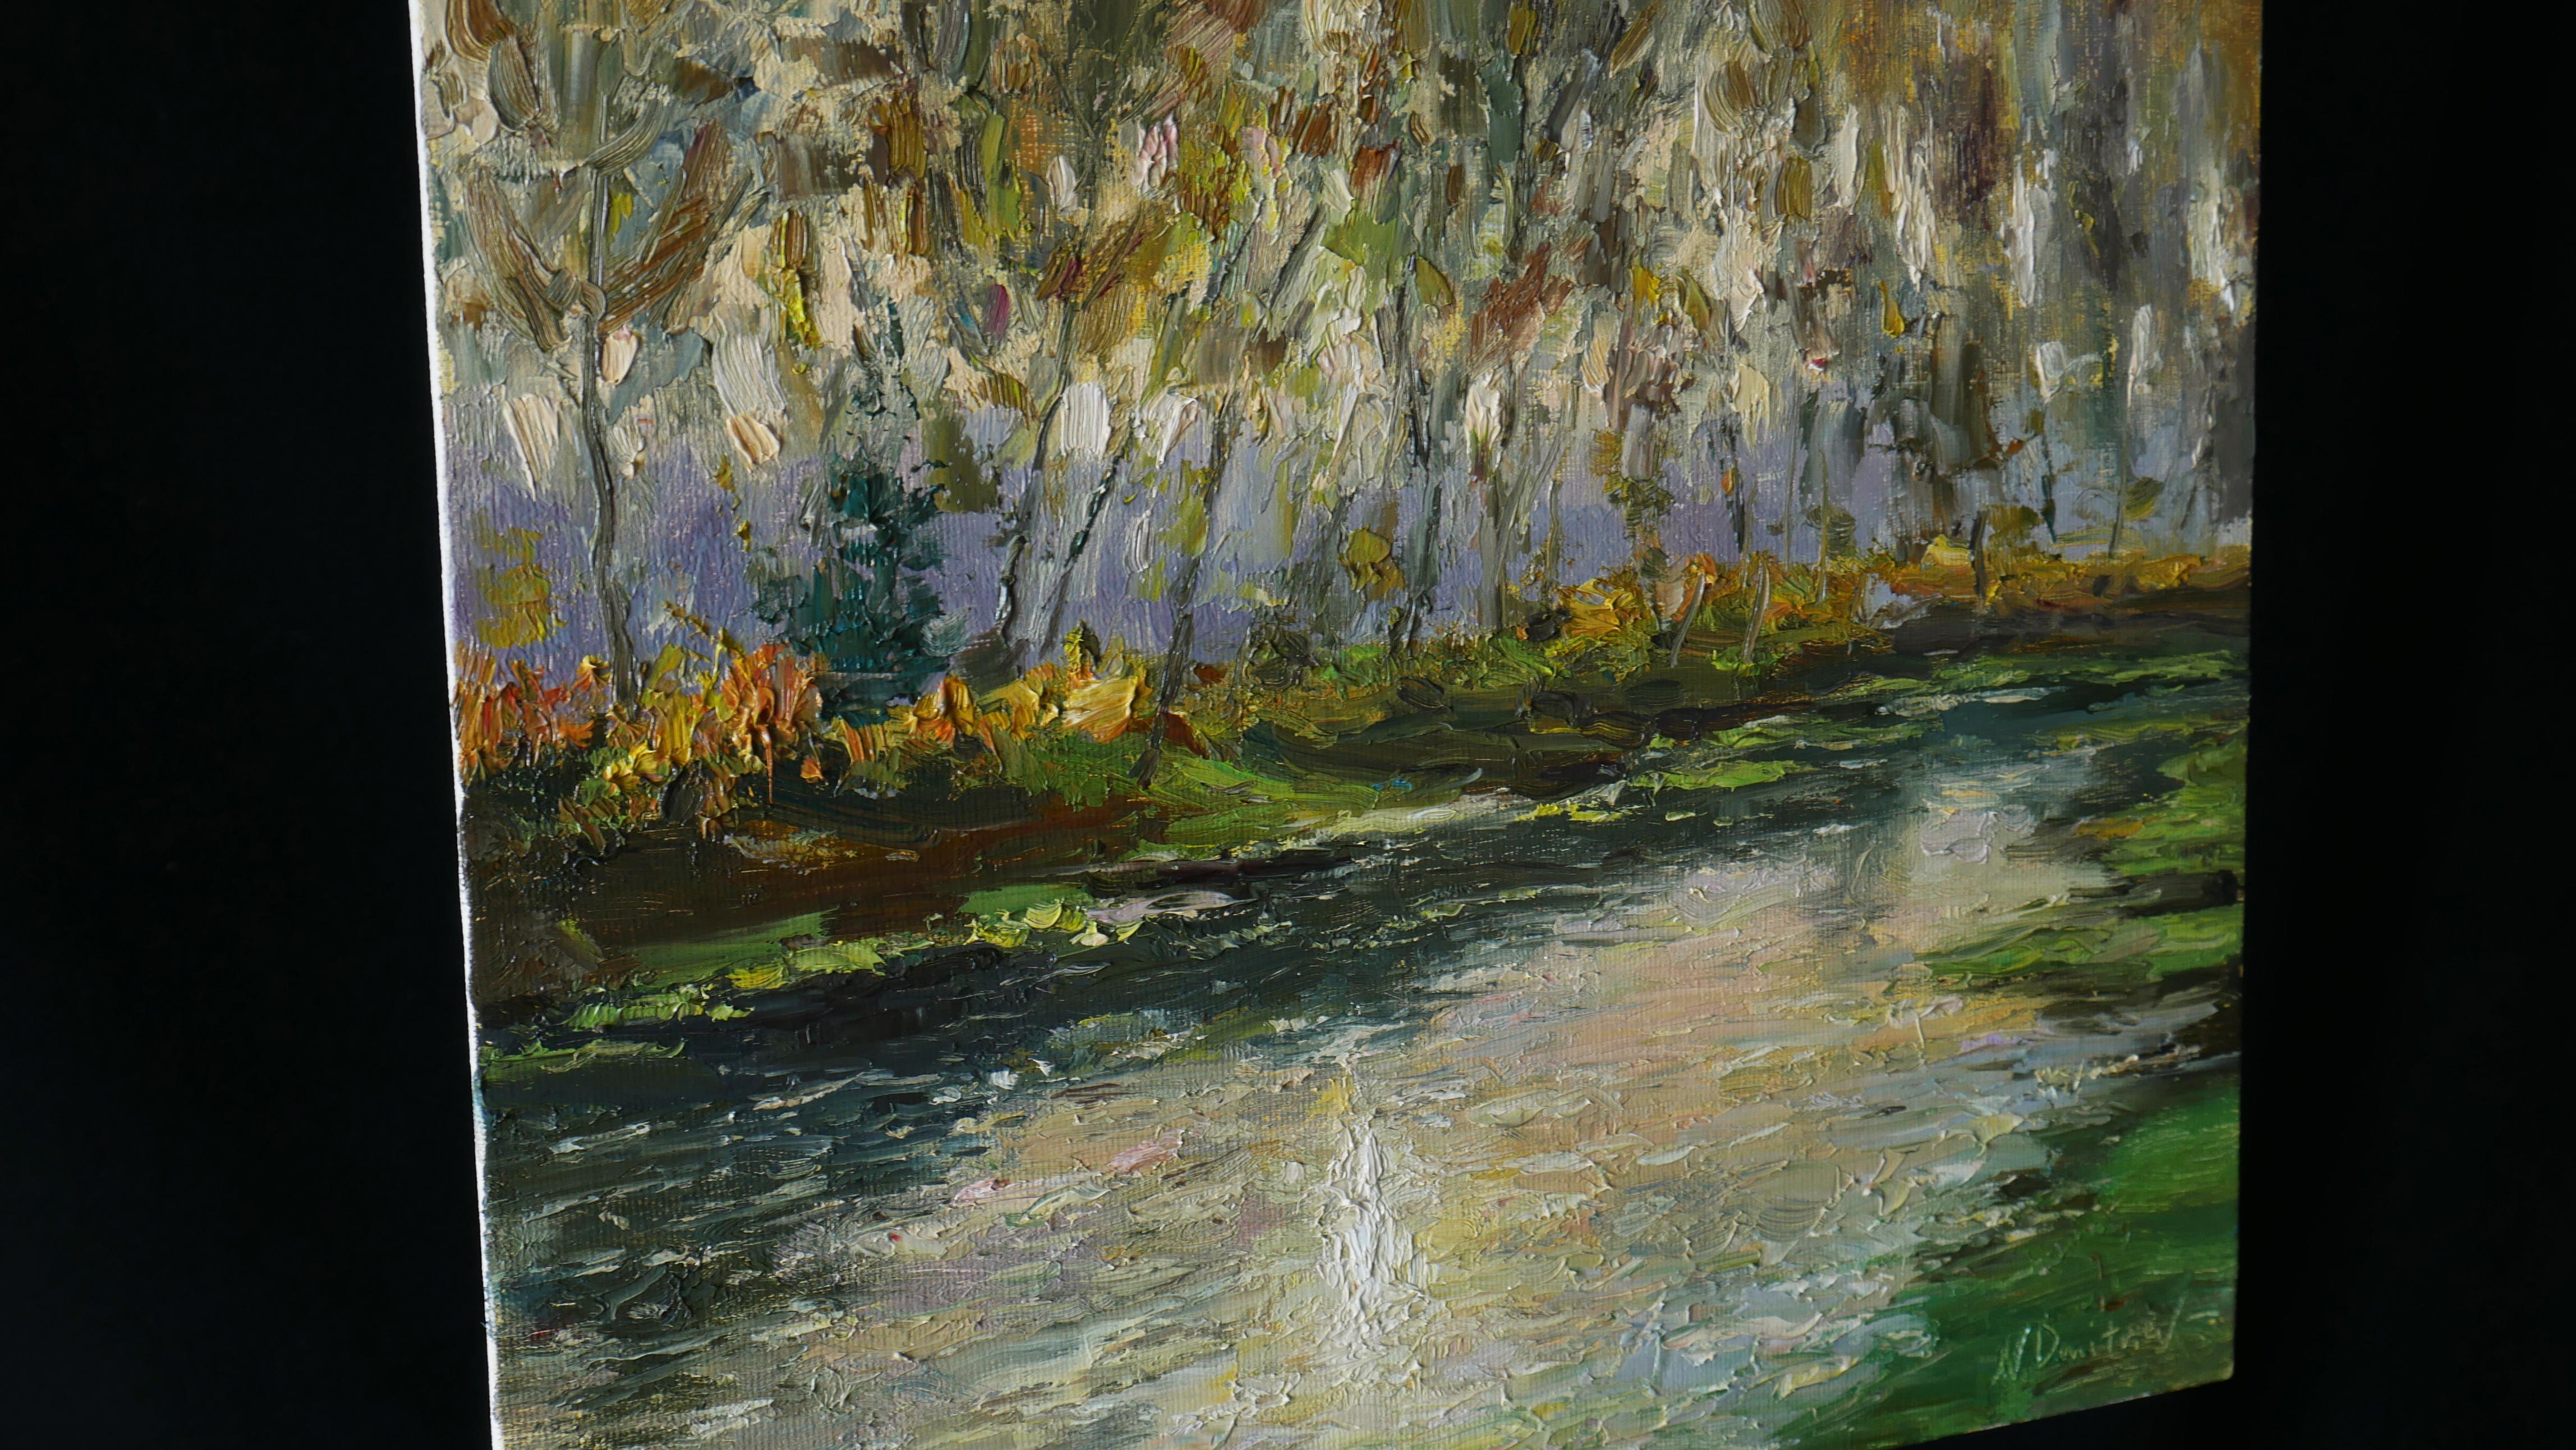 The impressionist sunny painting with the river and the Sun is a beautiful wall decor, the bright painting is full of different colours, combinations of warm and cold shades are professionally captured by the artist. The artwork is created en plein